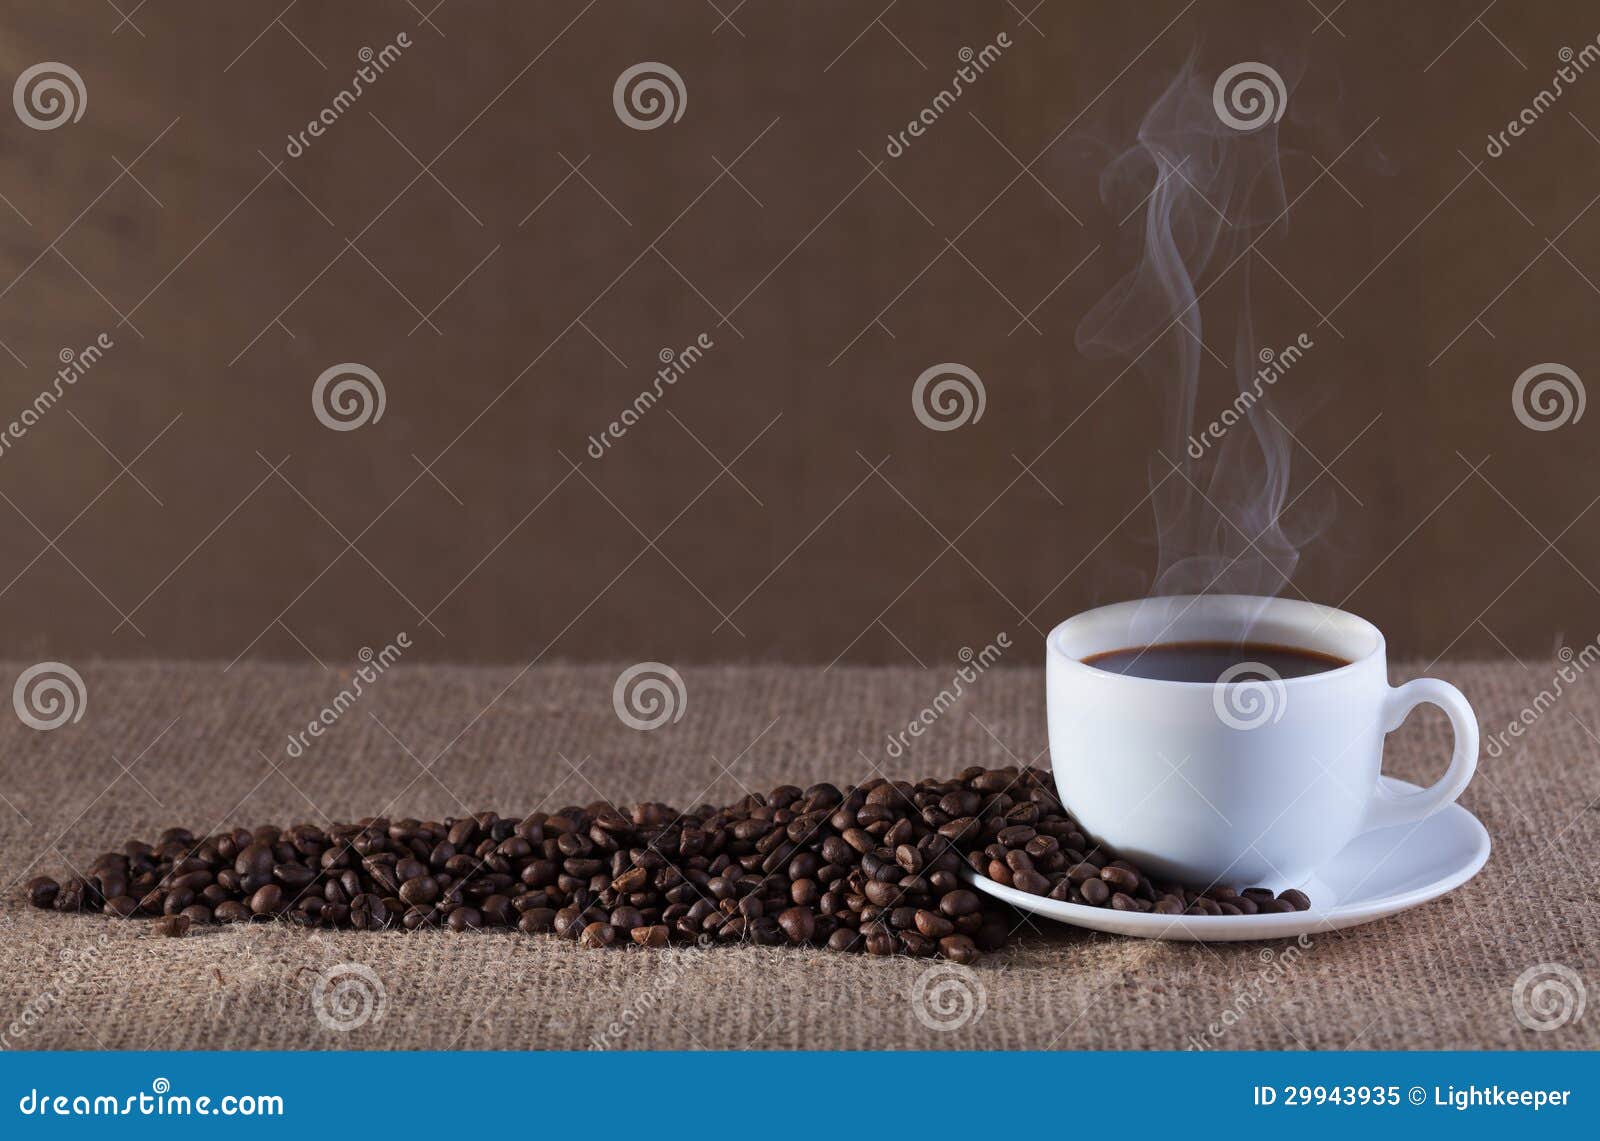 cup of hot steaming coffee